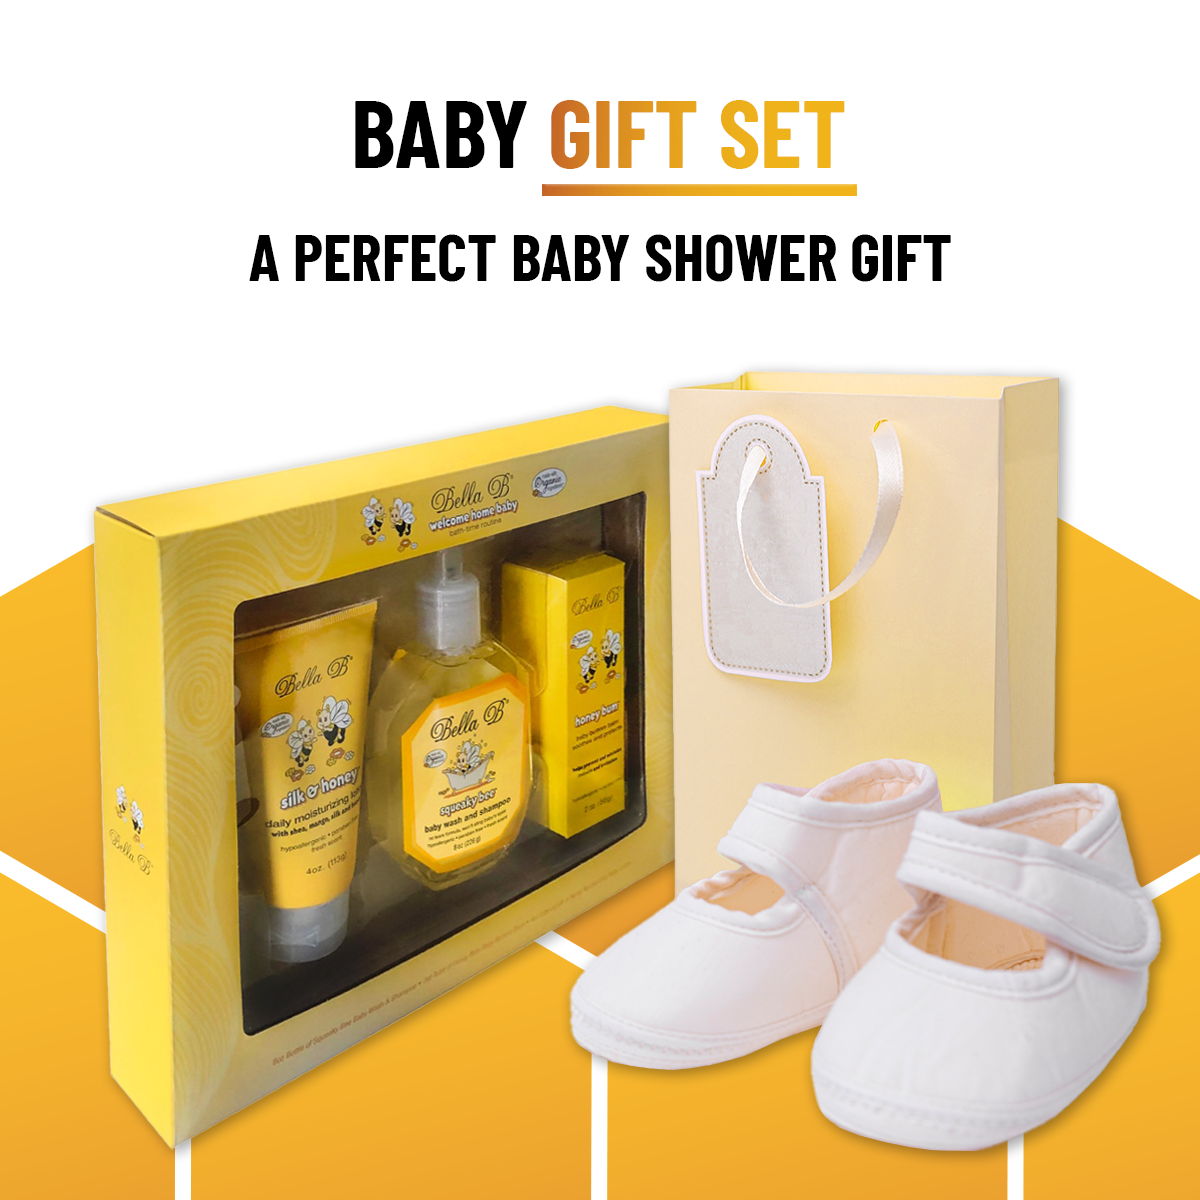 Bella B Gift Set - Welcome Home Baby 3 Piece